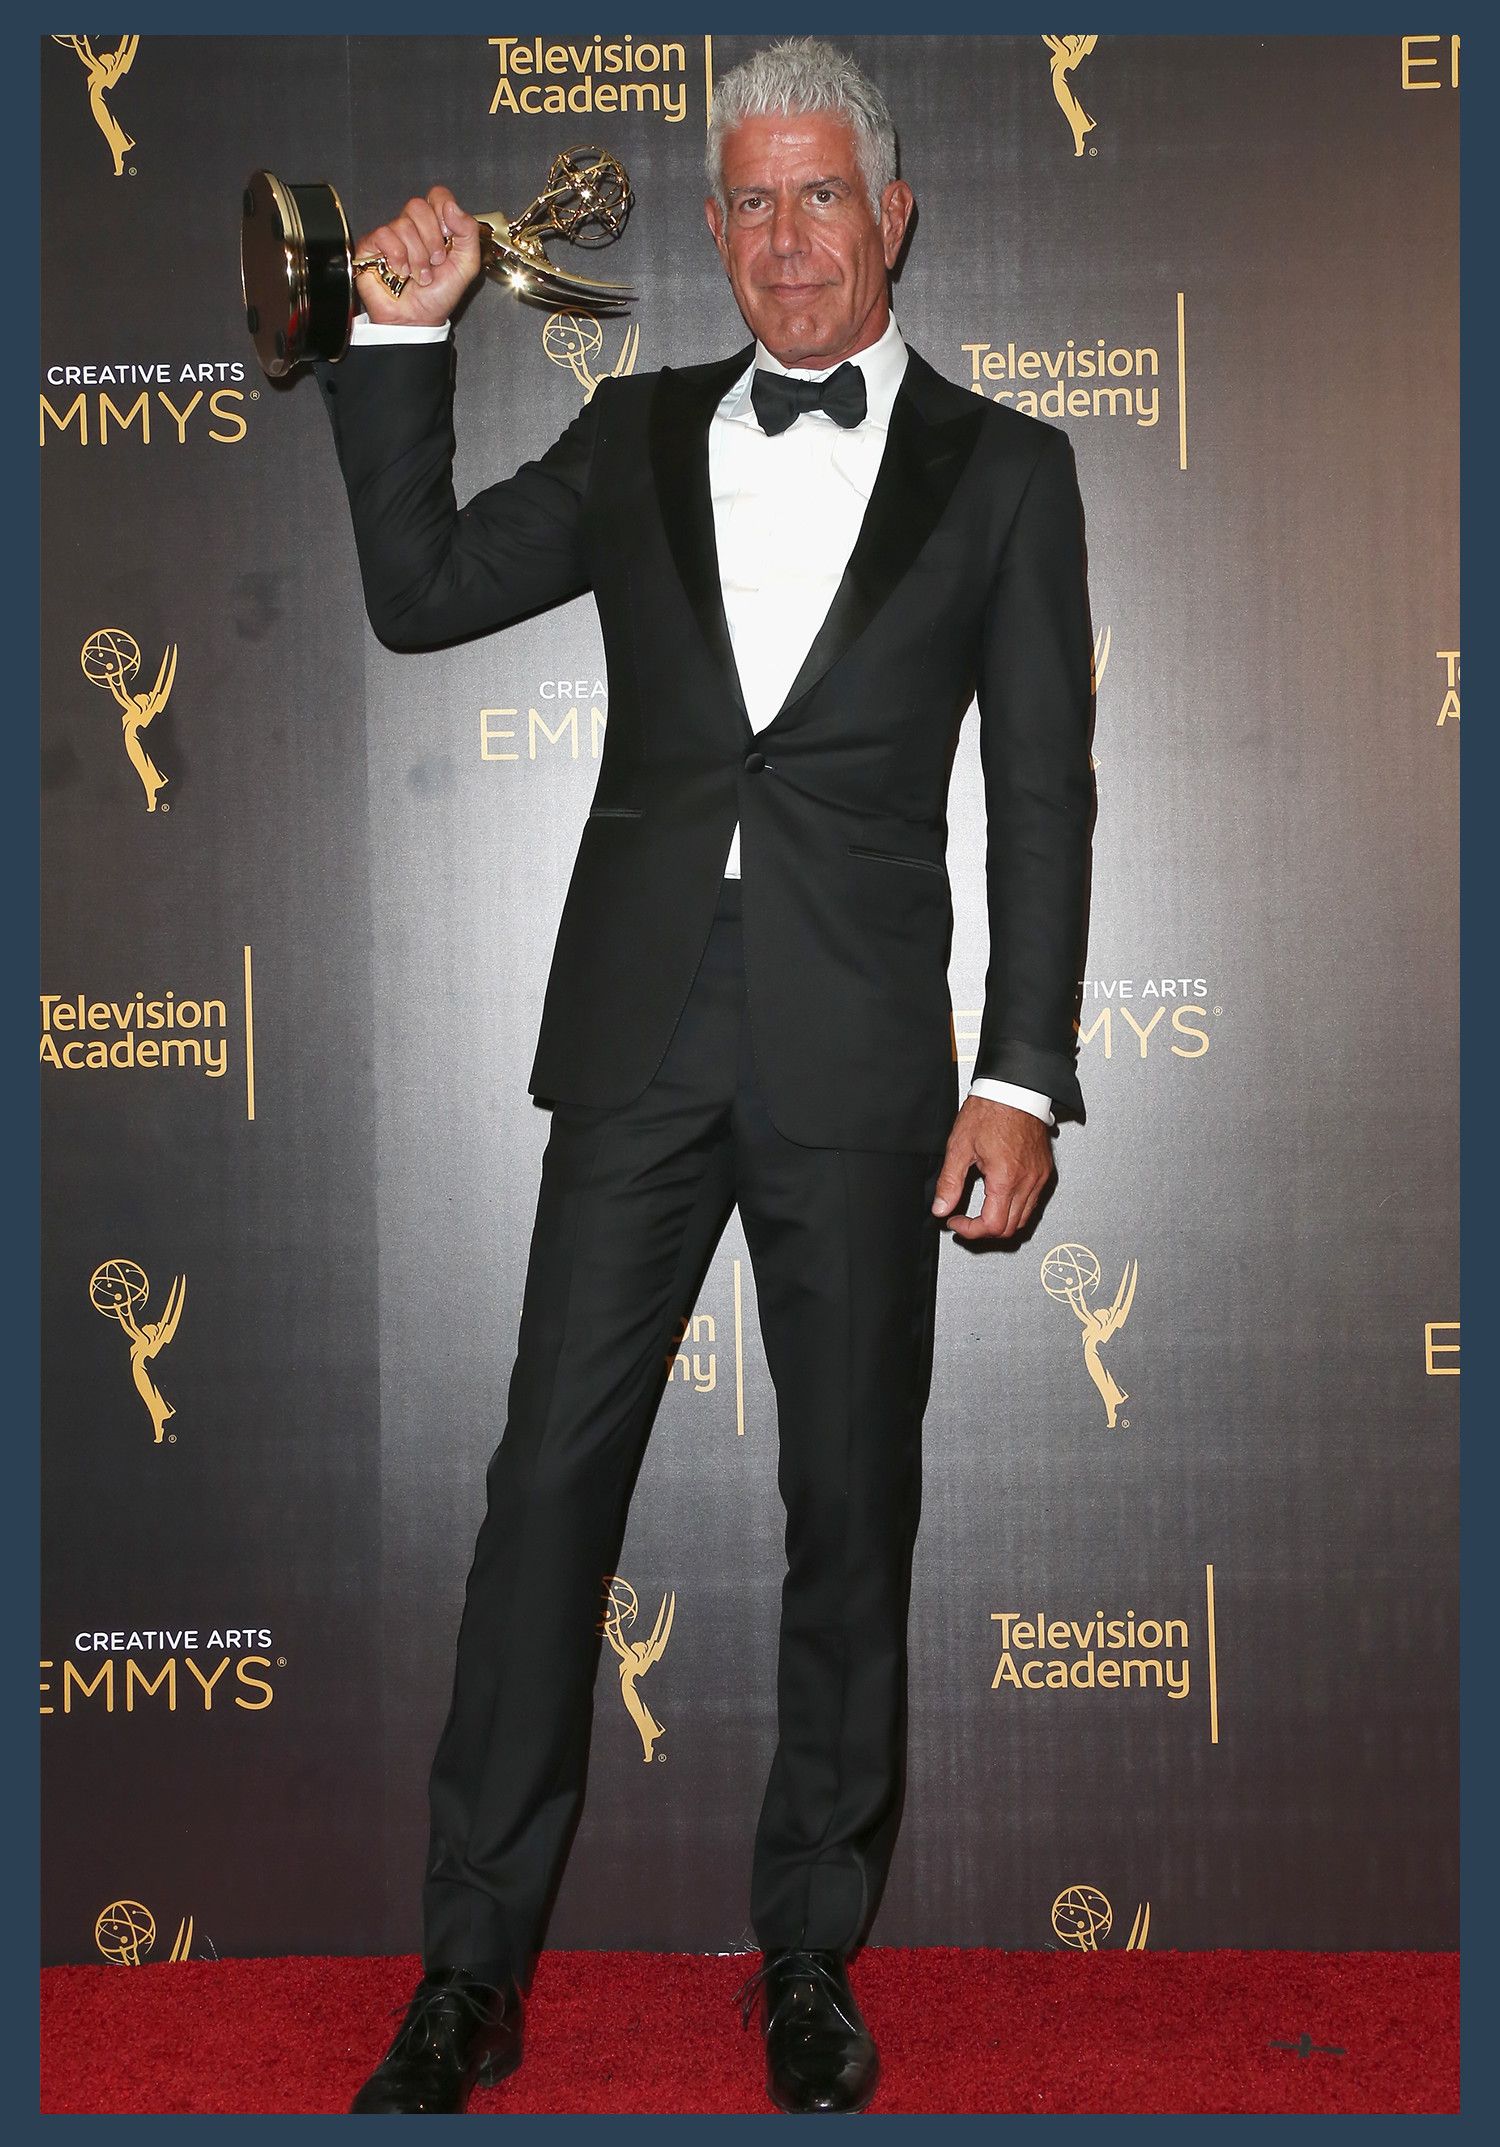 Tom Ford Emmys Tux Is Up for iGavel Auction